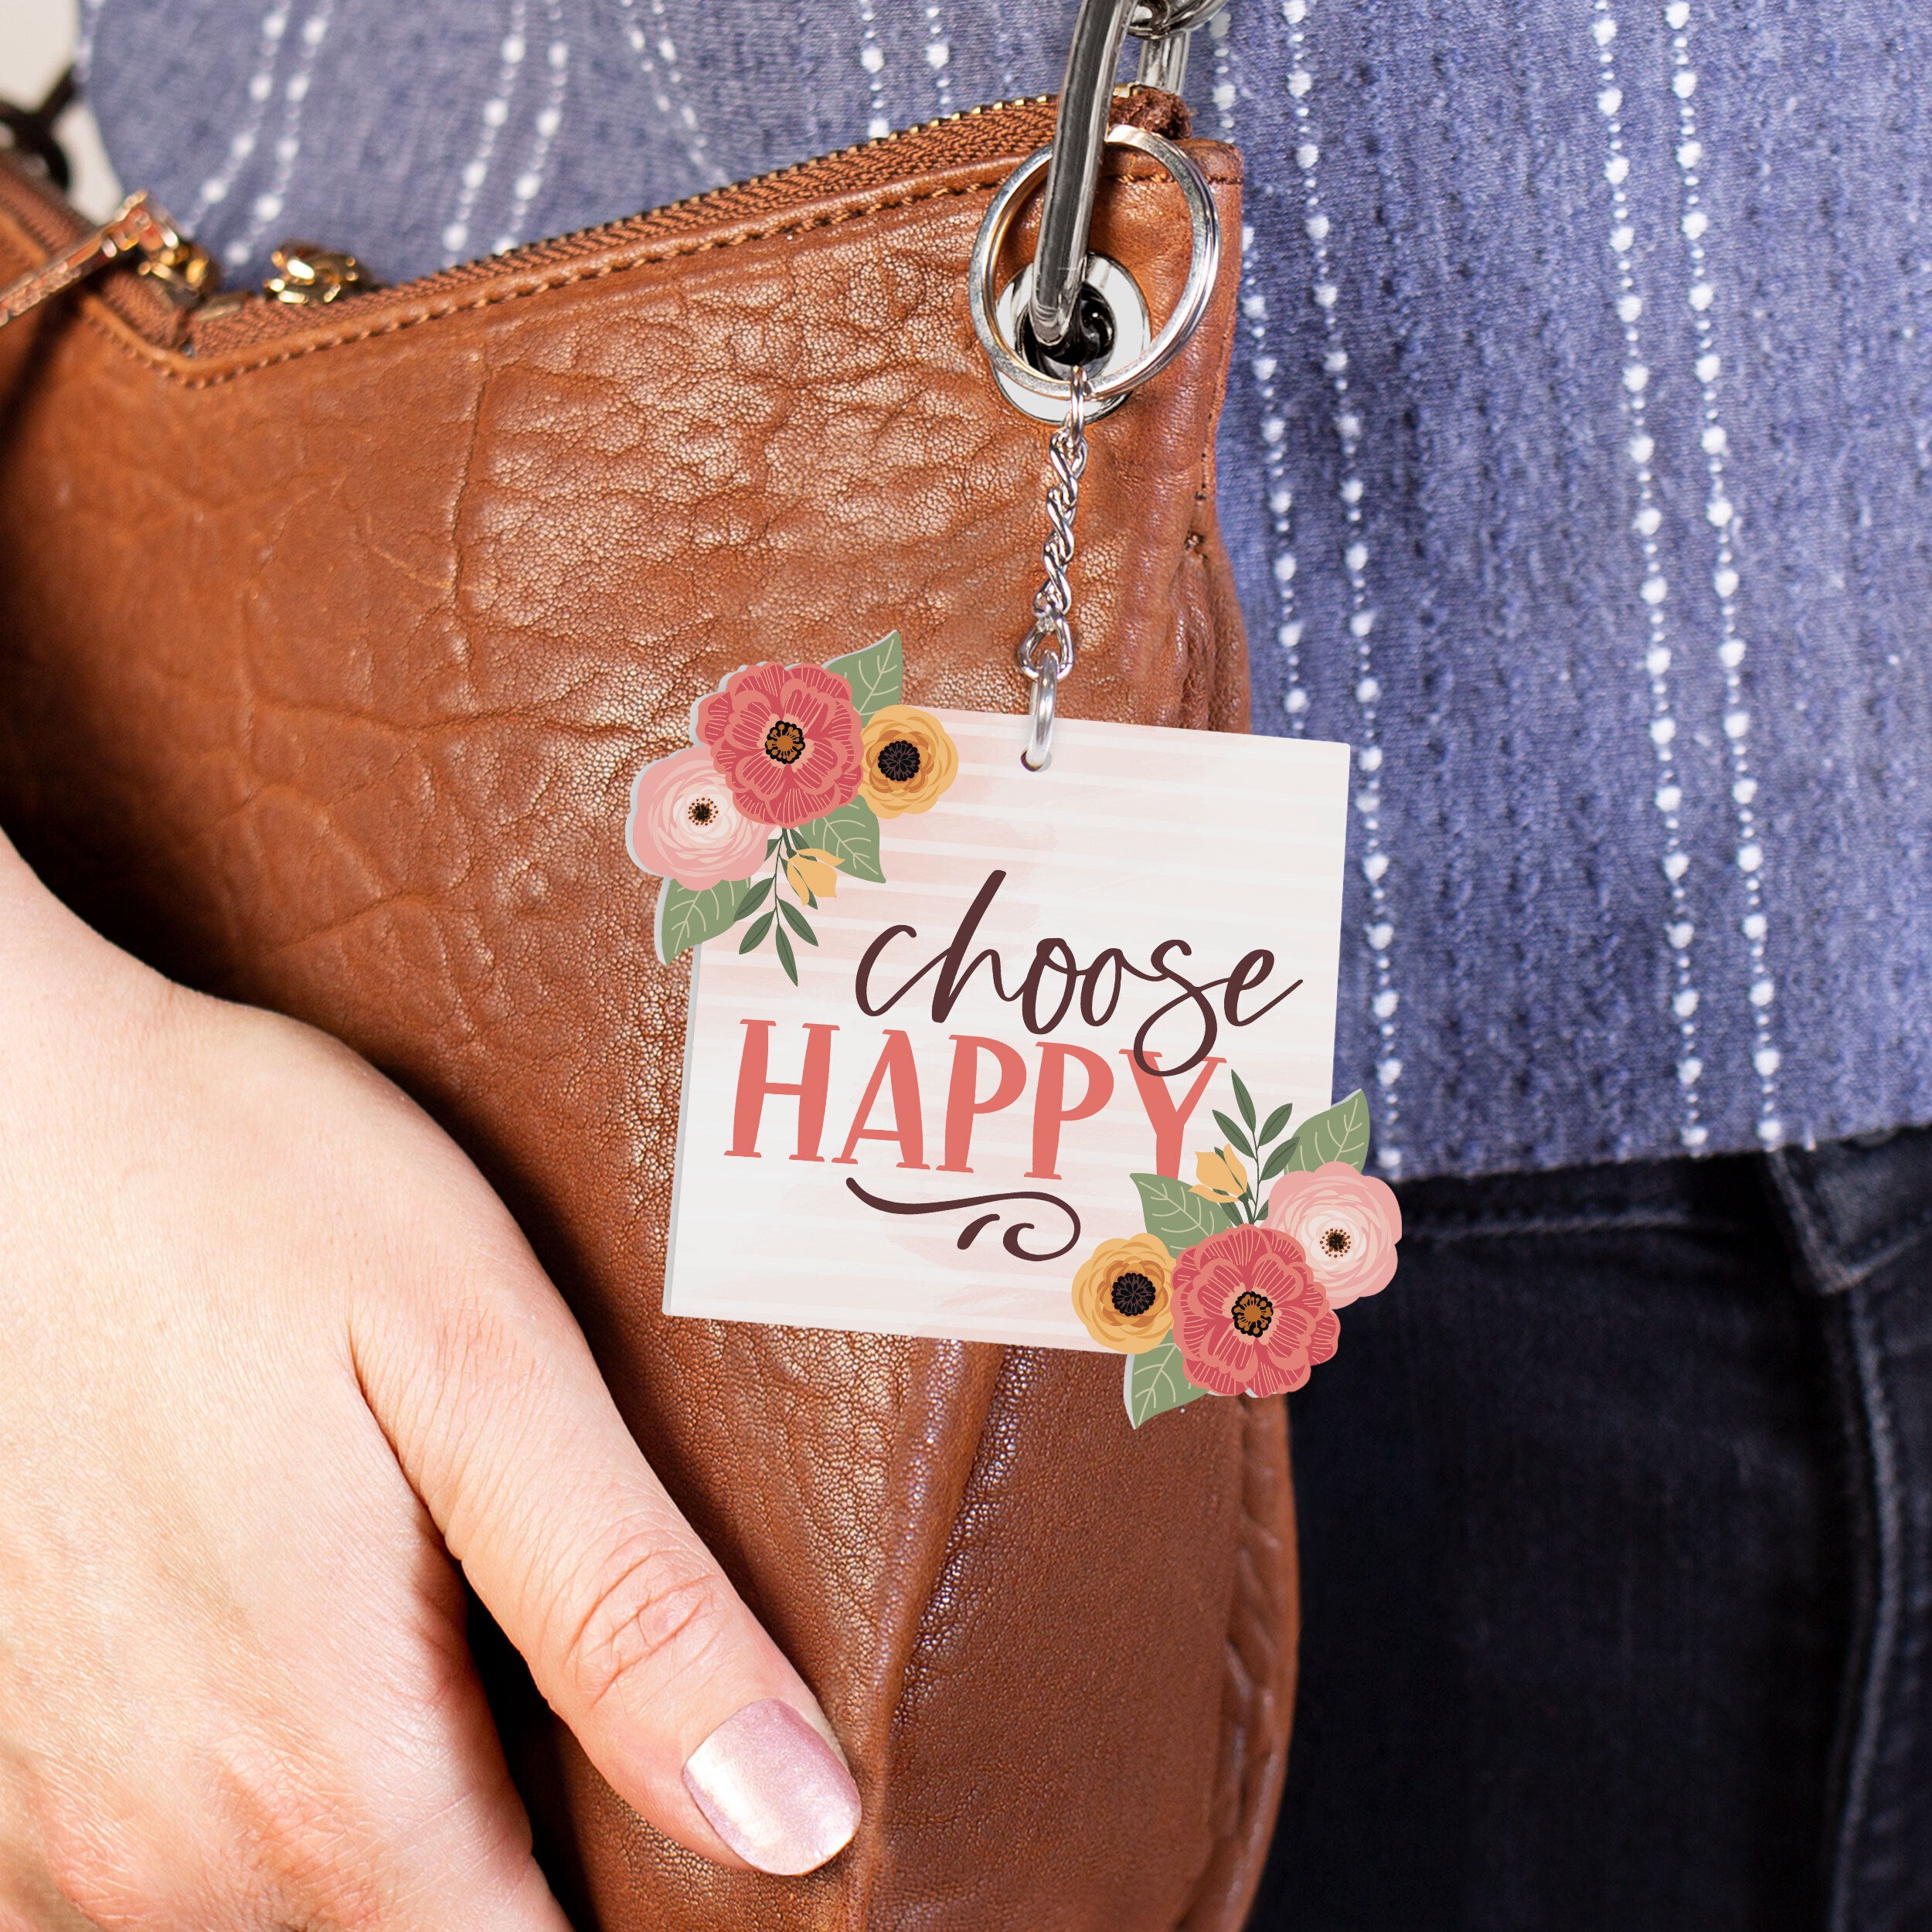 Choose Happy Acrylic Floral Square Shape Key Chain